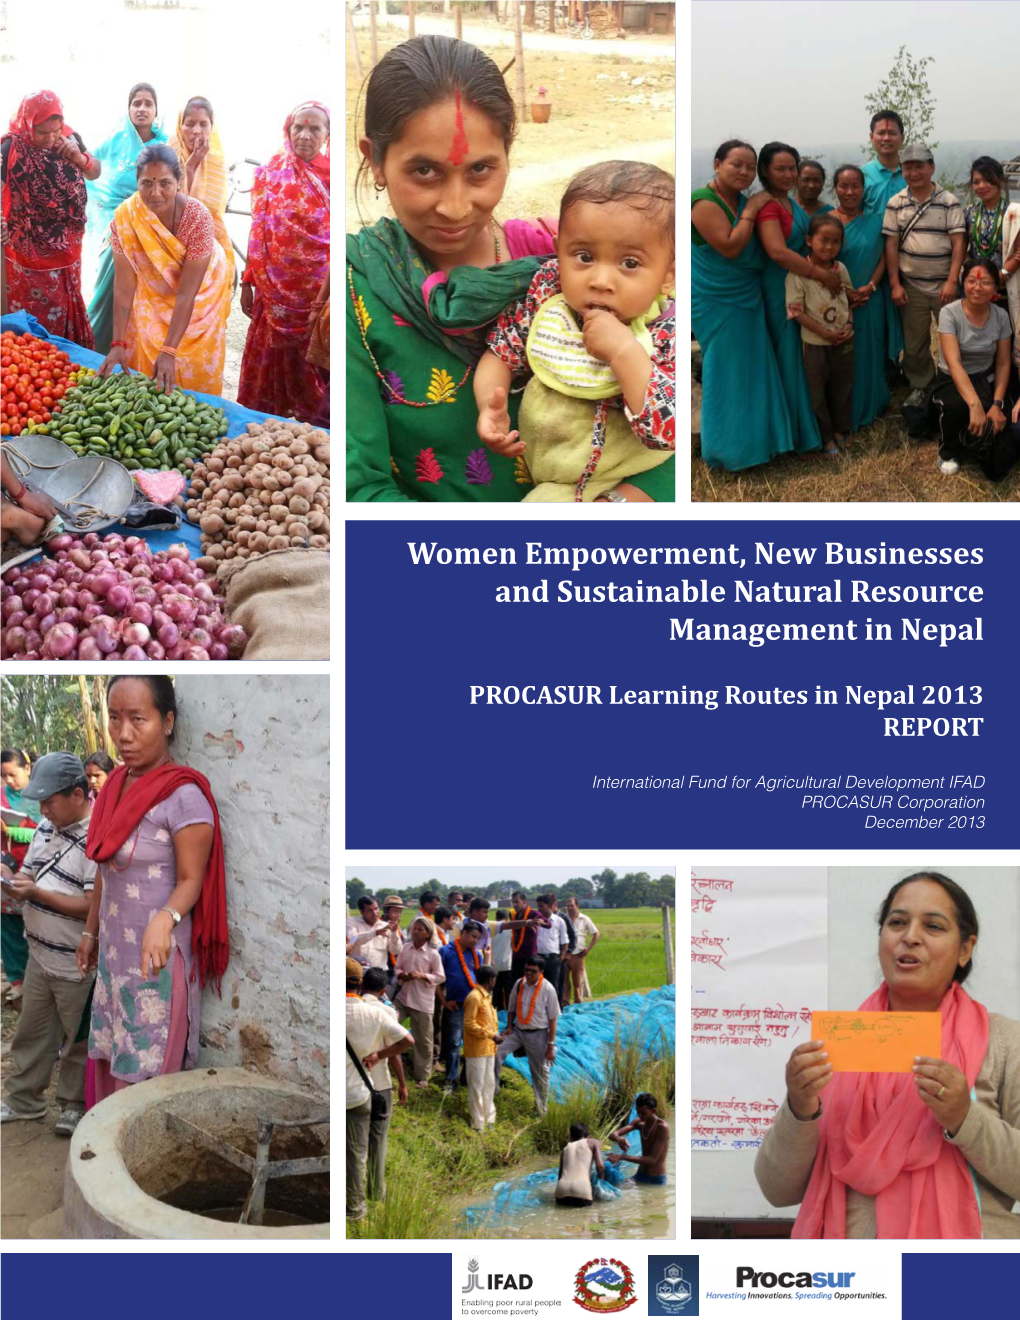 Women Empowerment, New Businesses and Sustainable Natural Resource Management in Nepal